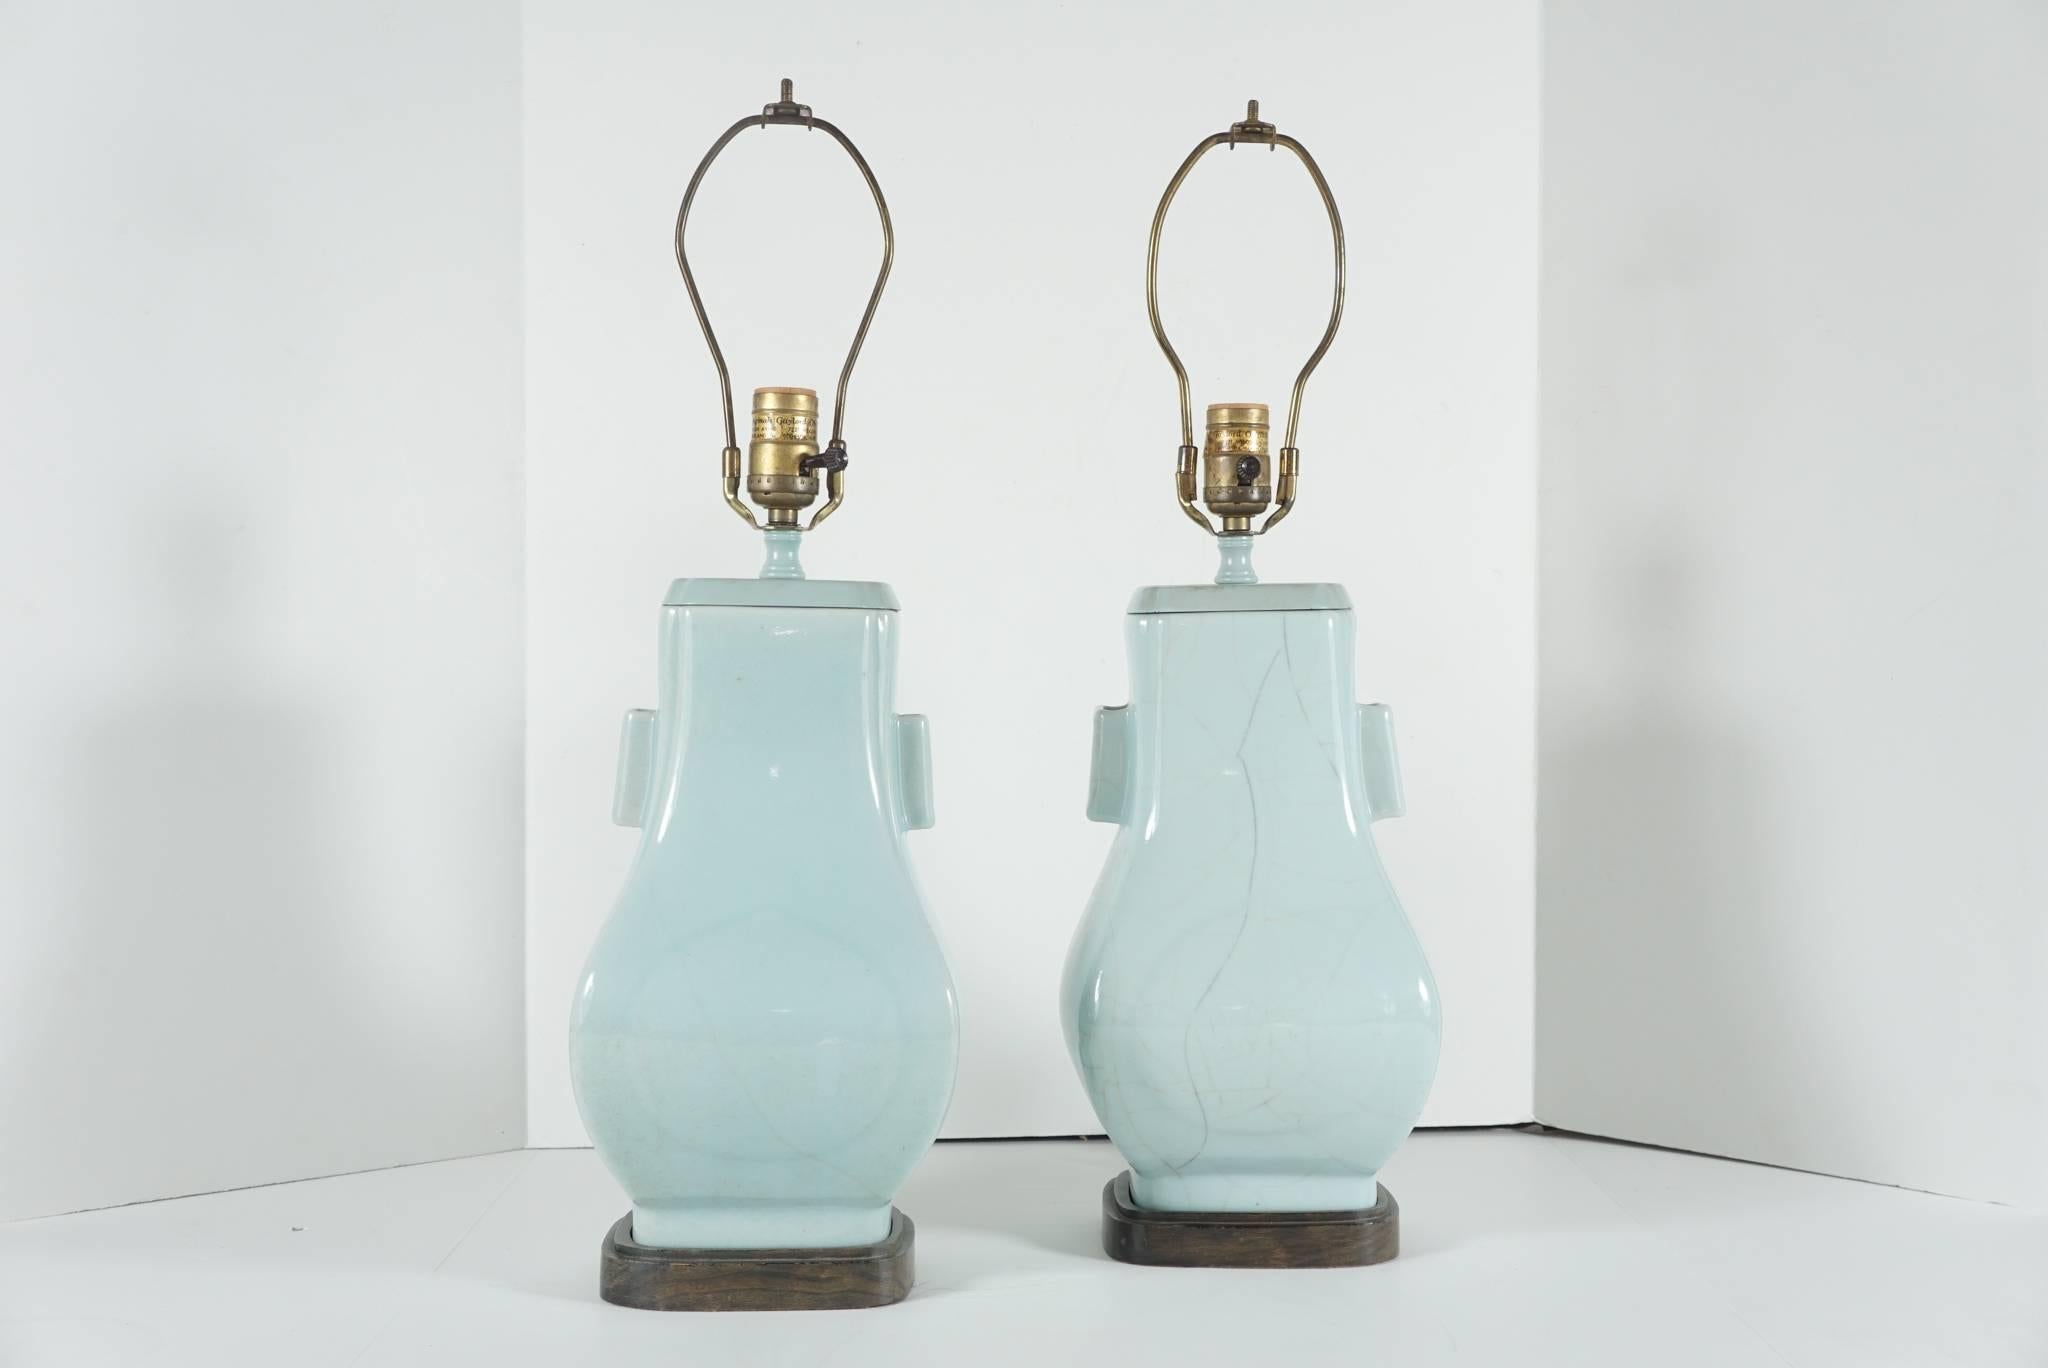 This fine pair of vases of archaistic square baluster form mounted as lamps comes from Hyde Park Antiques and were purchased in the 1960s. The porcelain is of fine quality and heavily molded. The crackled glaze is deep and largely patterned and is